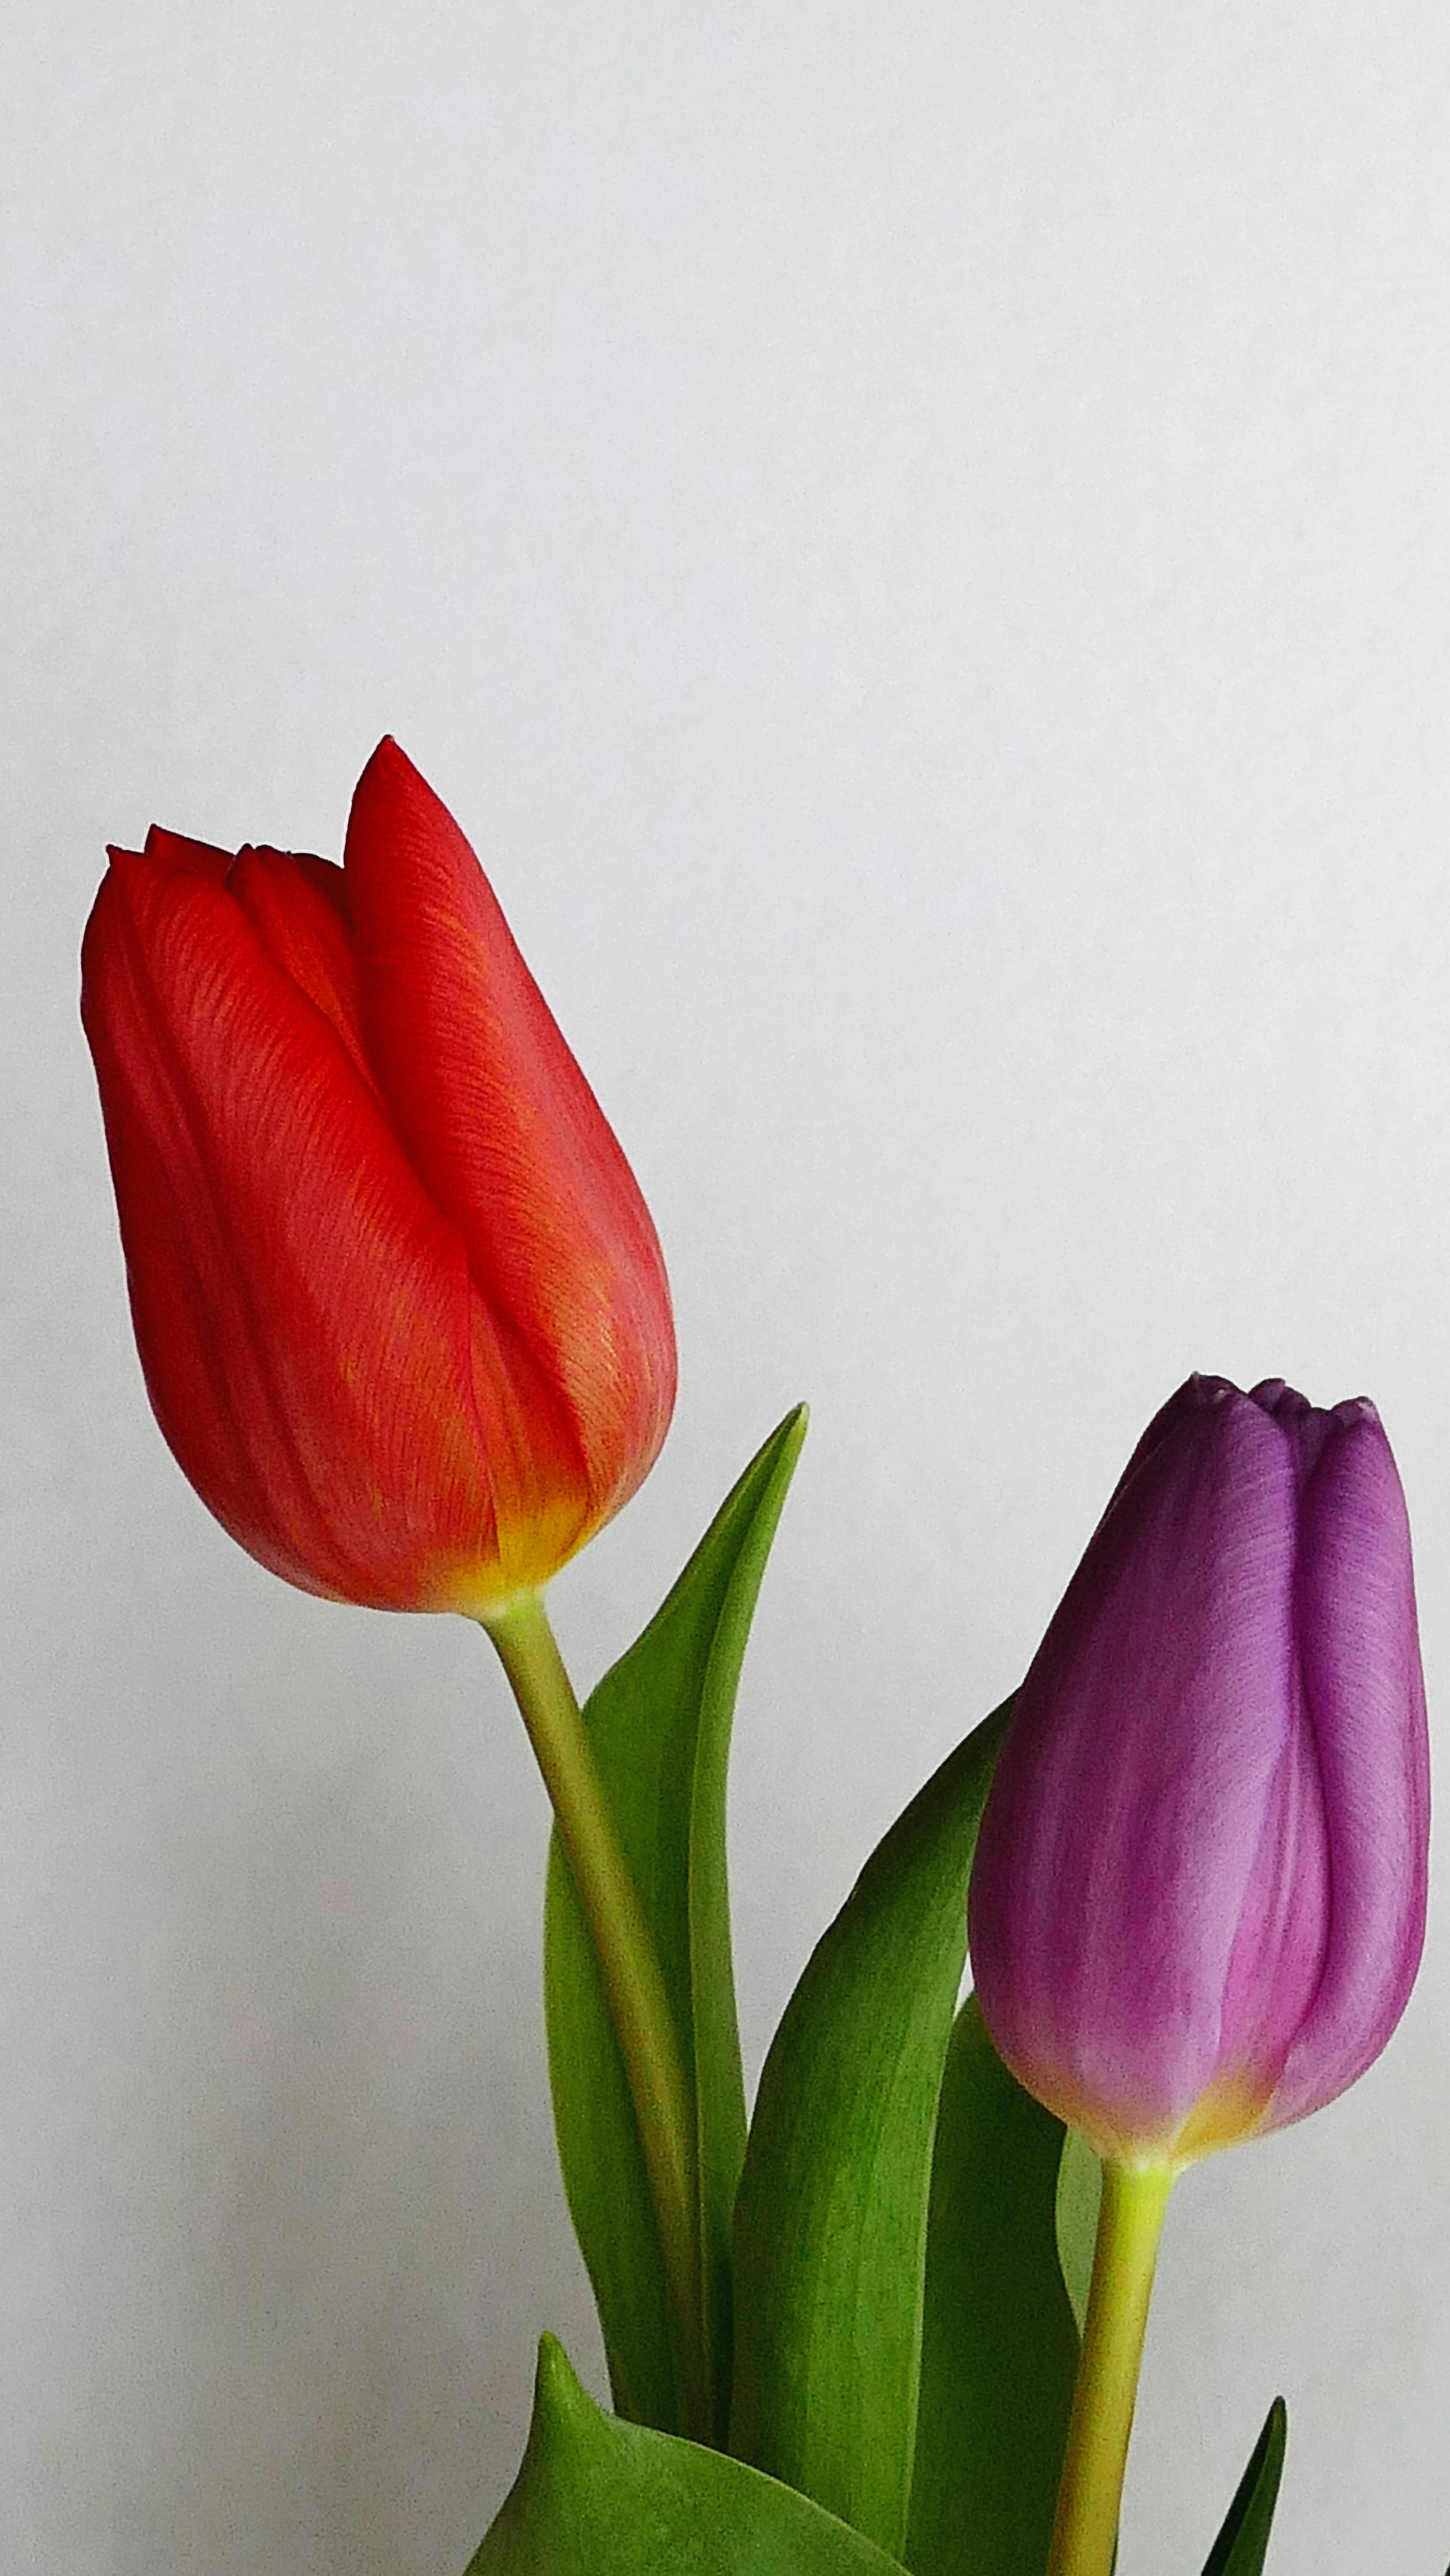 Tulips Photos The Best Free